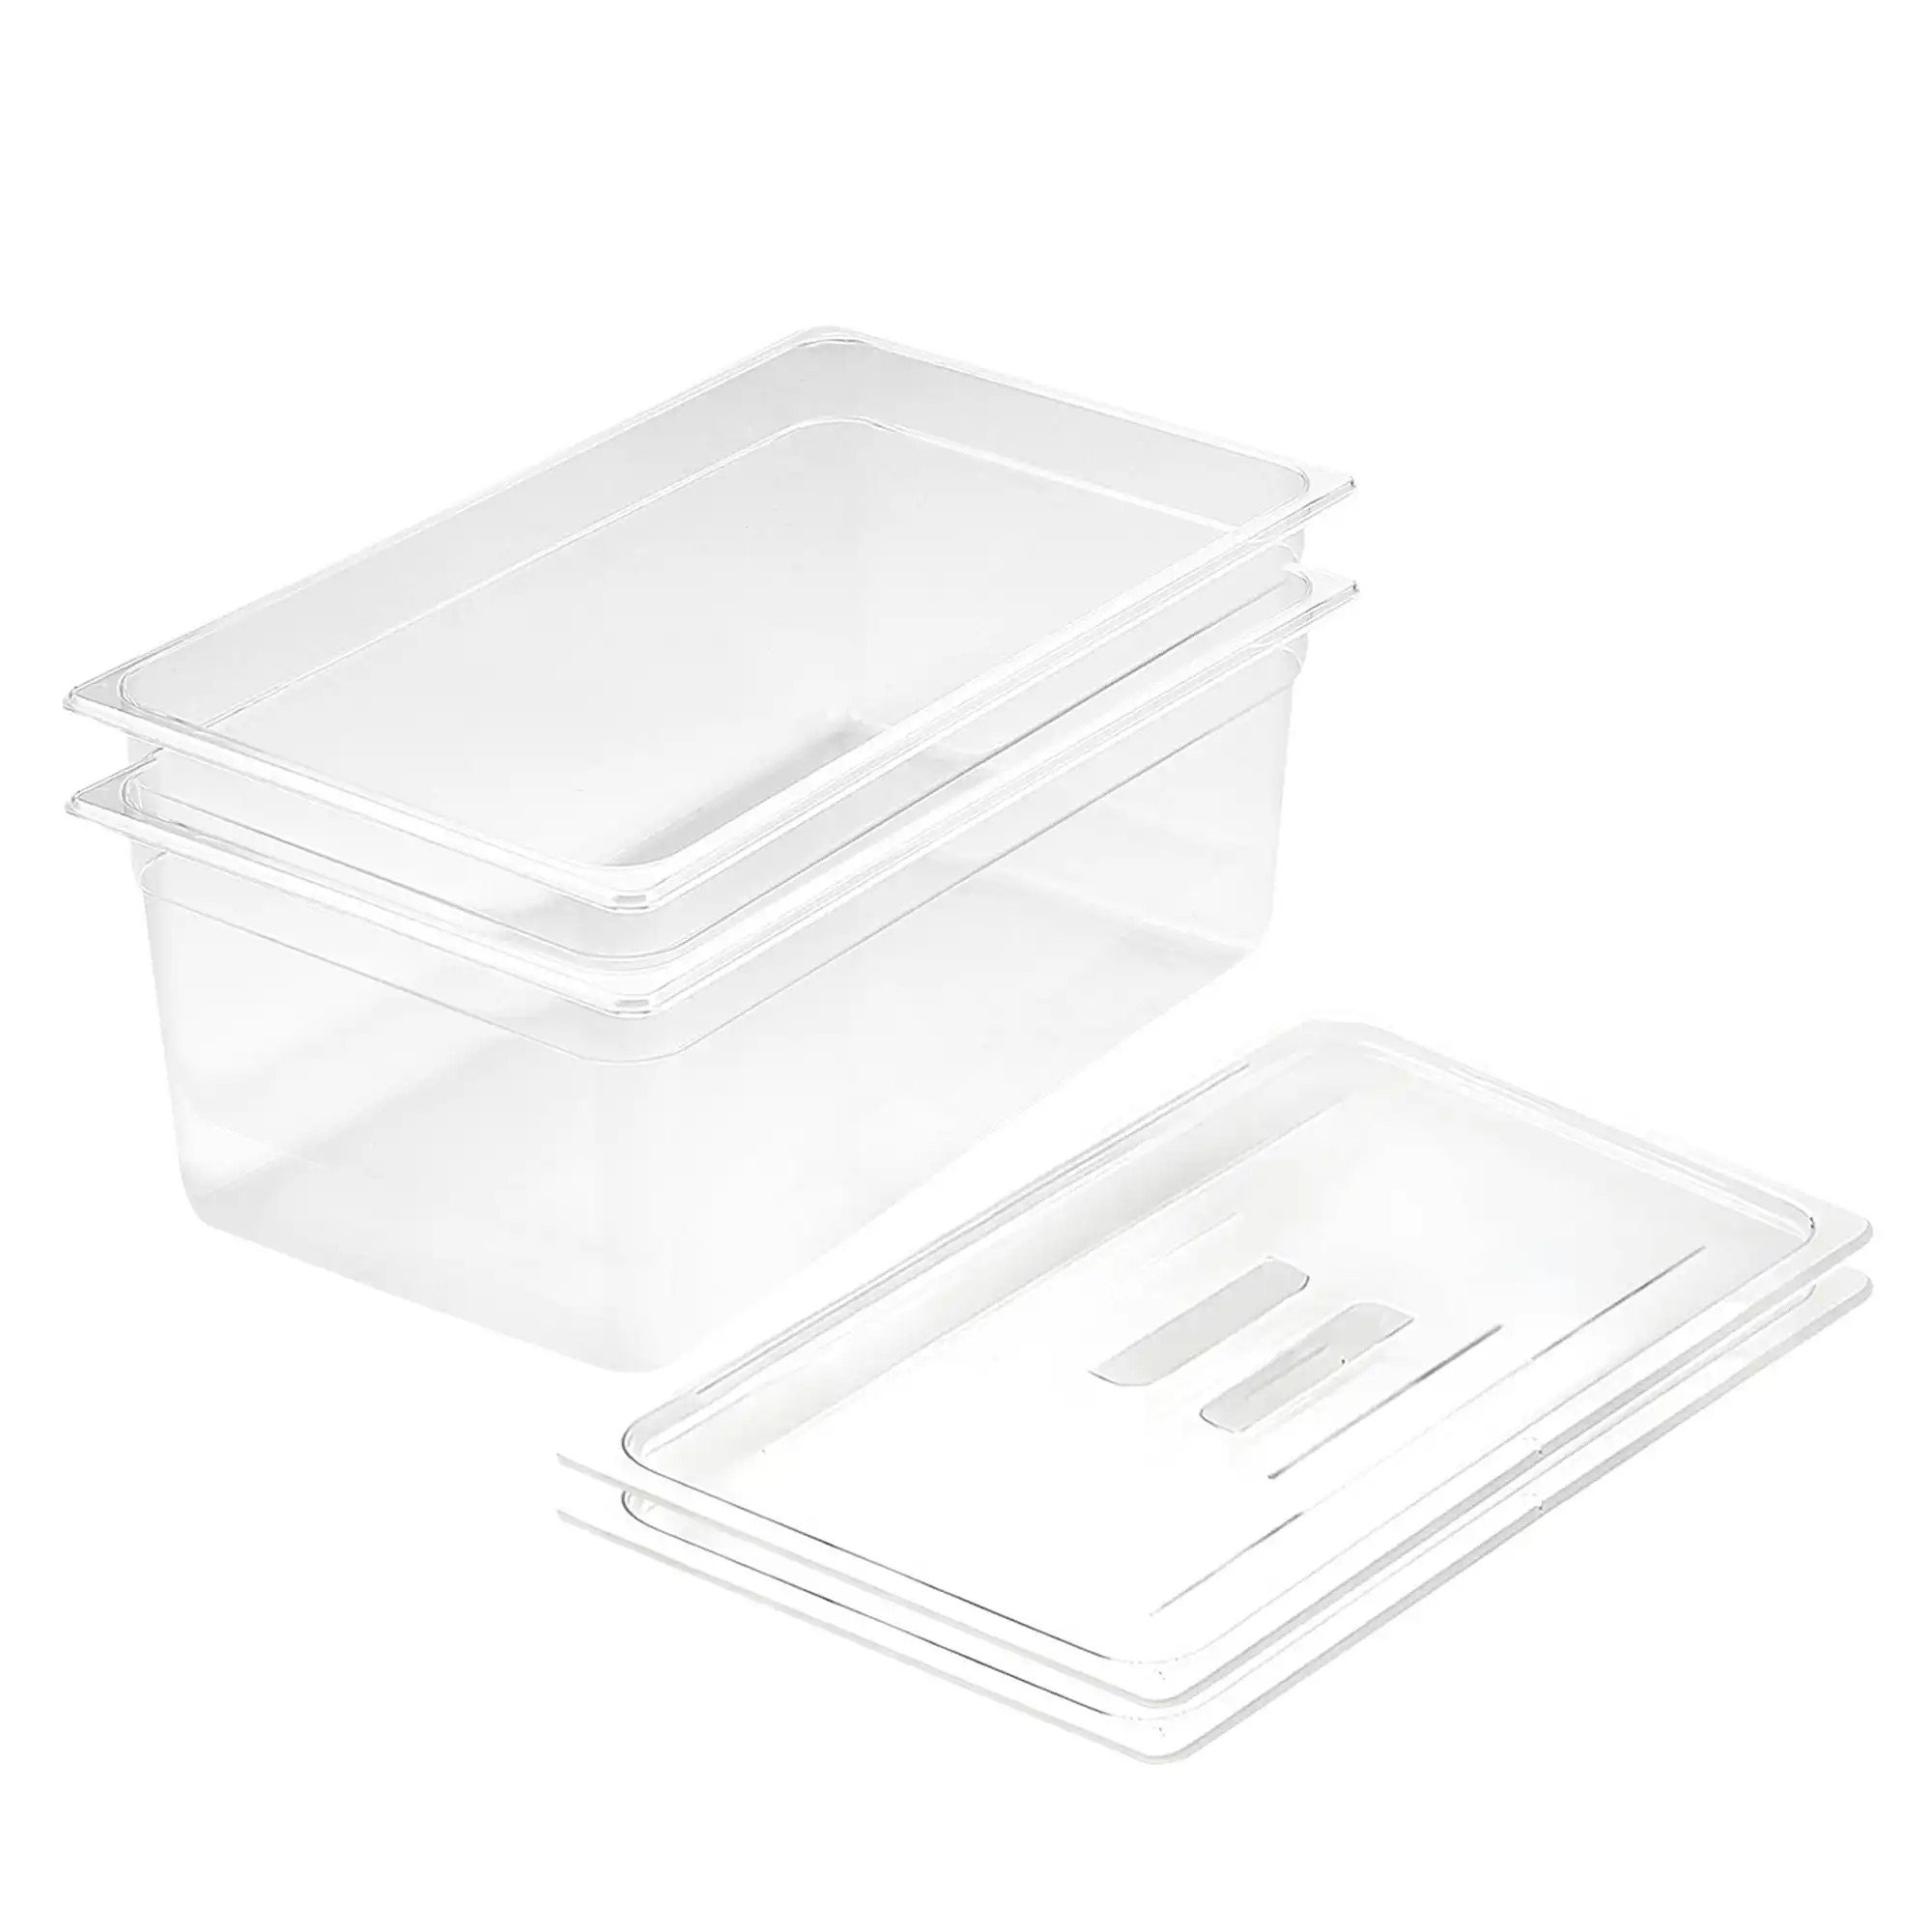 Soga 200mm Clear Gastronorm GN Pan 1/1 Food Tray Storage Bundle of 2 with Lid